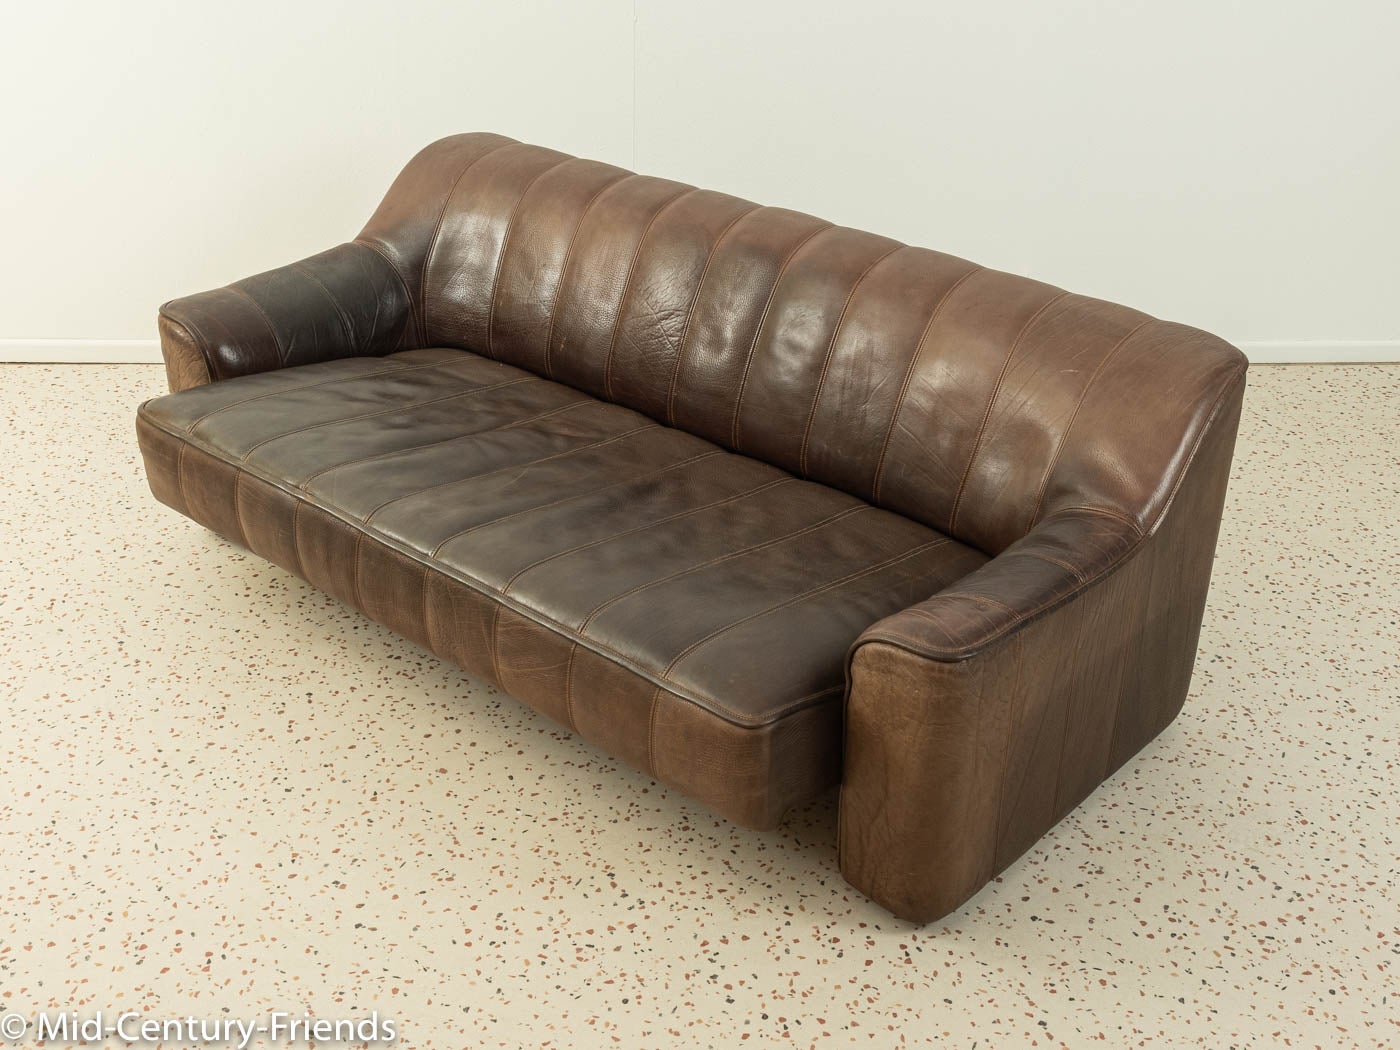 Classic sofa from the 1970s. Model DS-44 by DeSede with the striking original cover made of brown buffalo leather and coarse stitching. The seat squab of the three-seater can be enlarged with a simple movement and will transform into a more cozy and